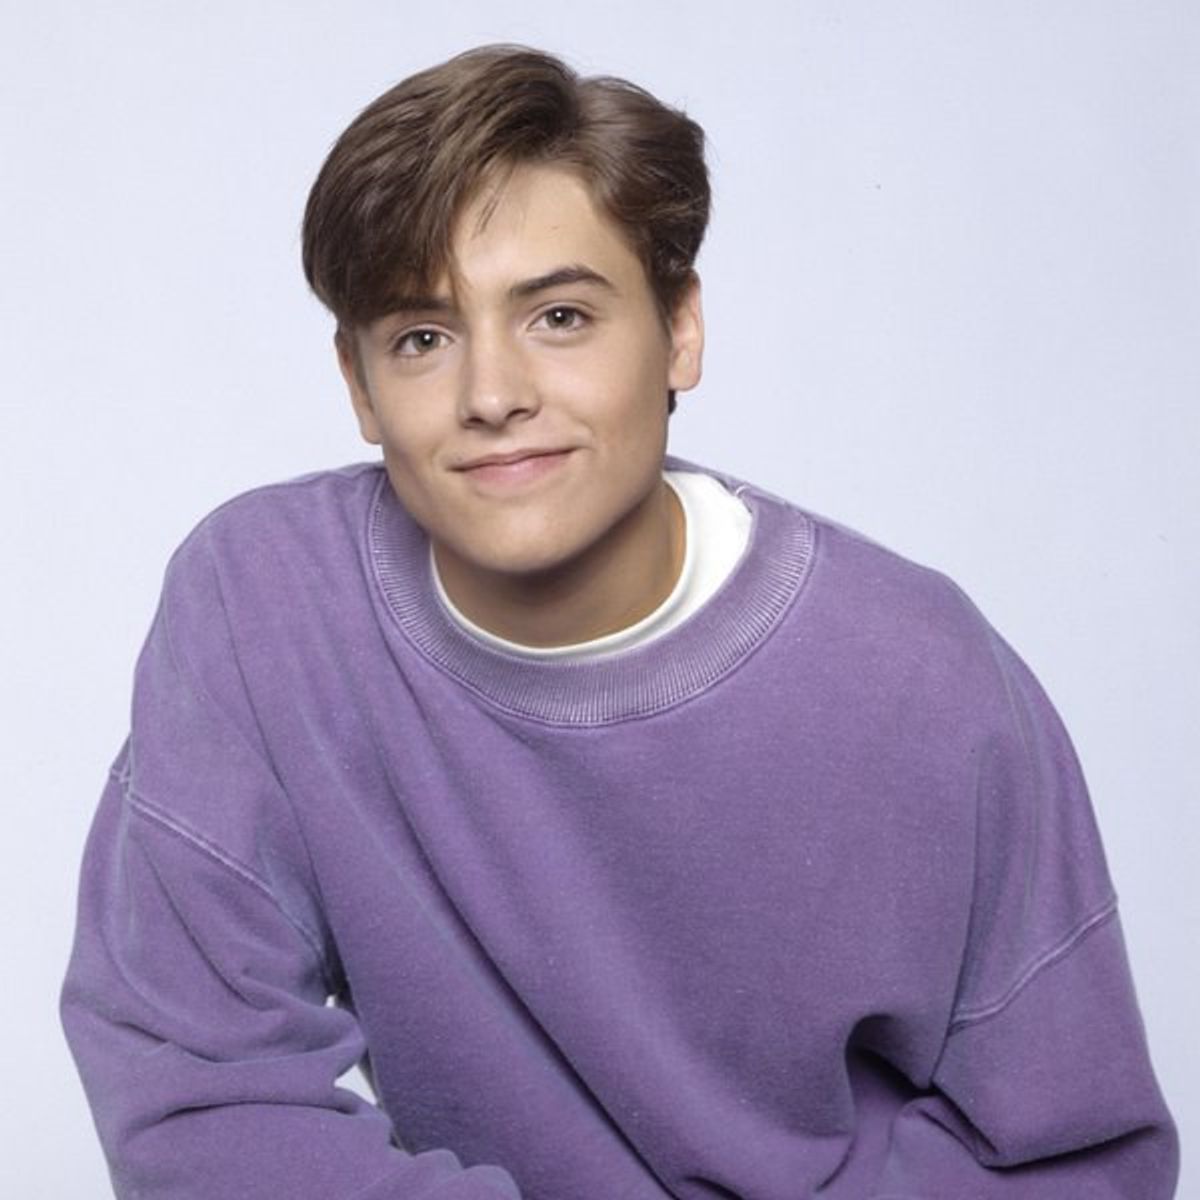 10 Eric Matthews Gifs That Will Make You Say 'OMG That's Me!'